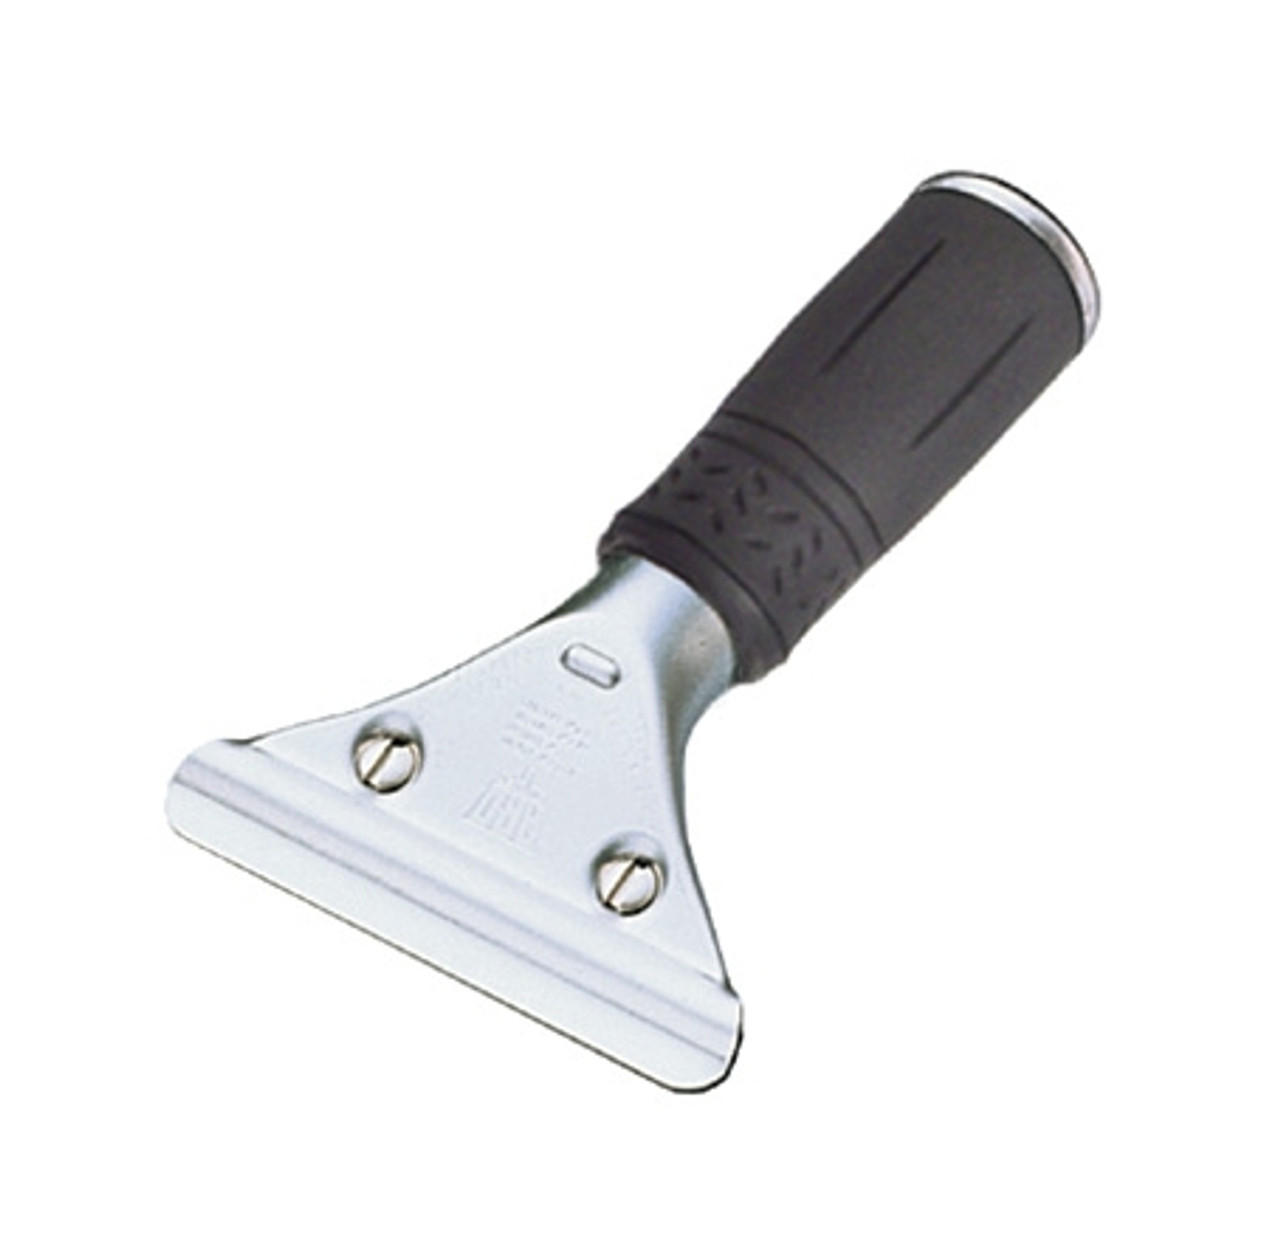 Unger 12 in. Pro Stainless Steel Window Squeegee